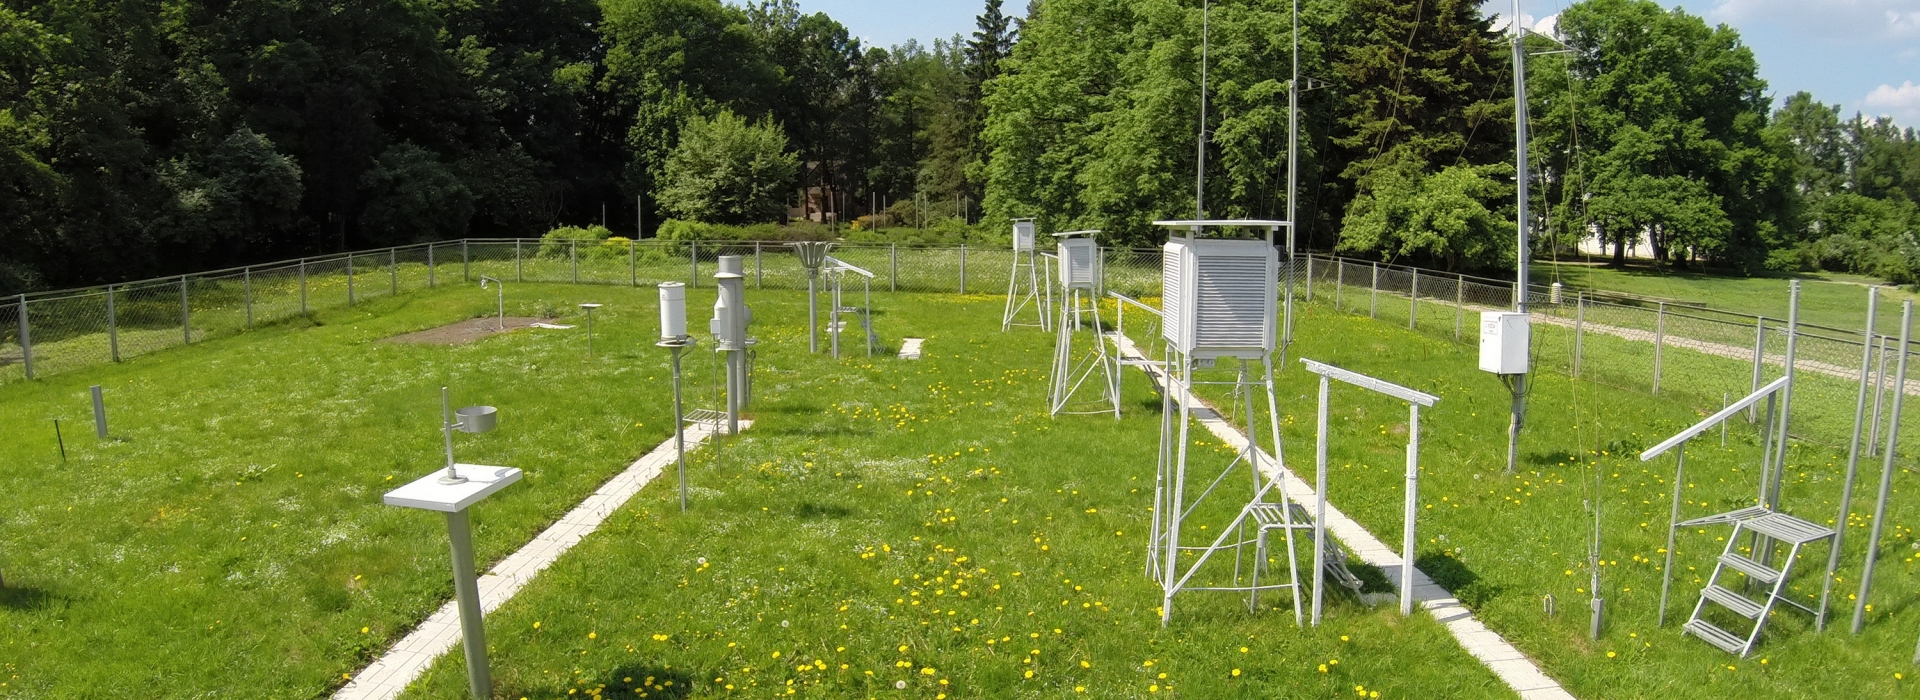 Automatic weather stations